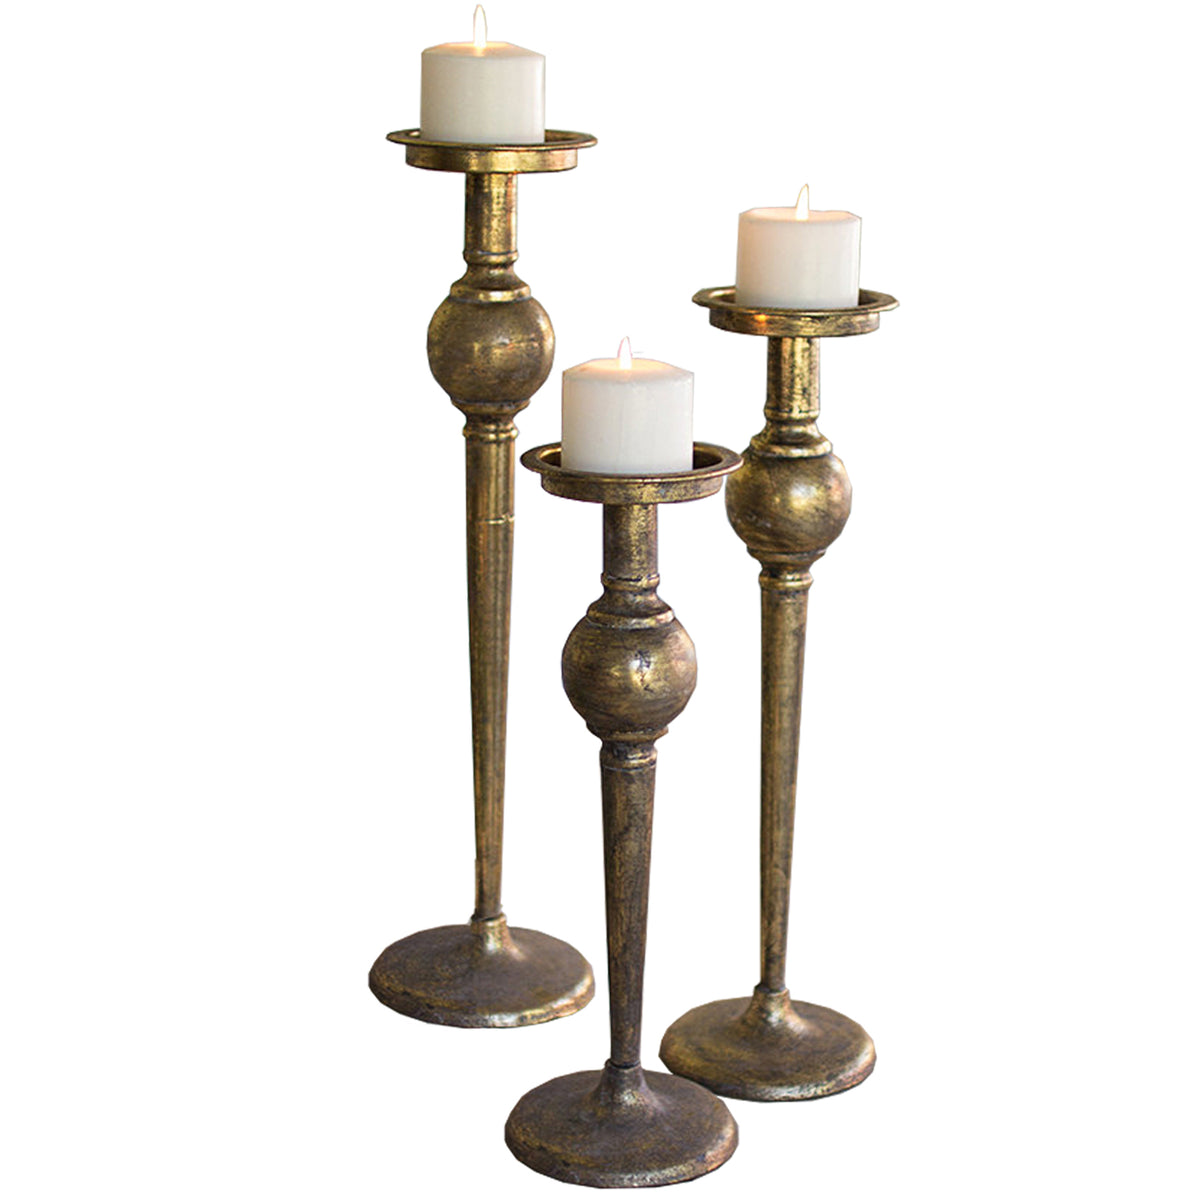  Hatway Brass Candle Holders Set of 6 for Taper Candles